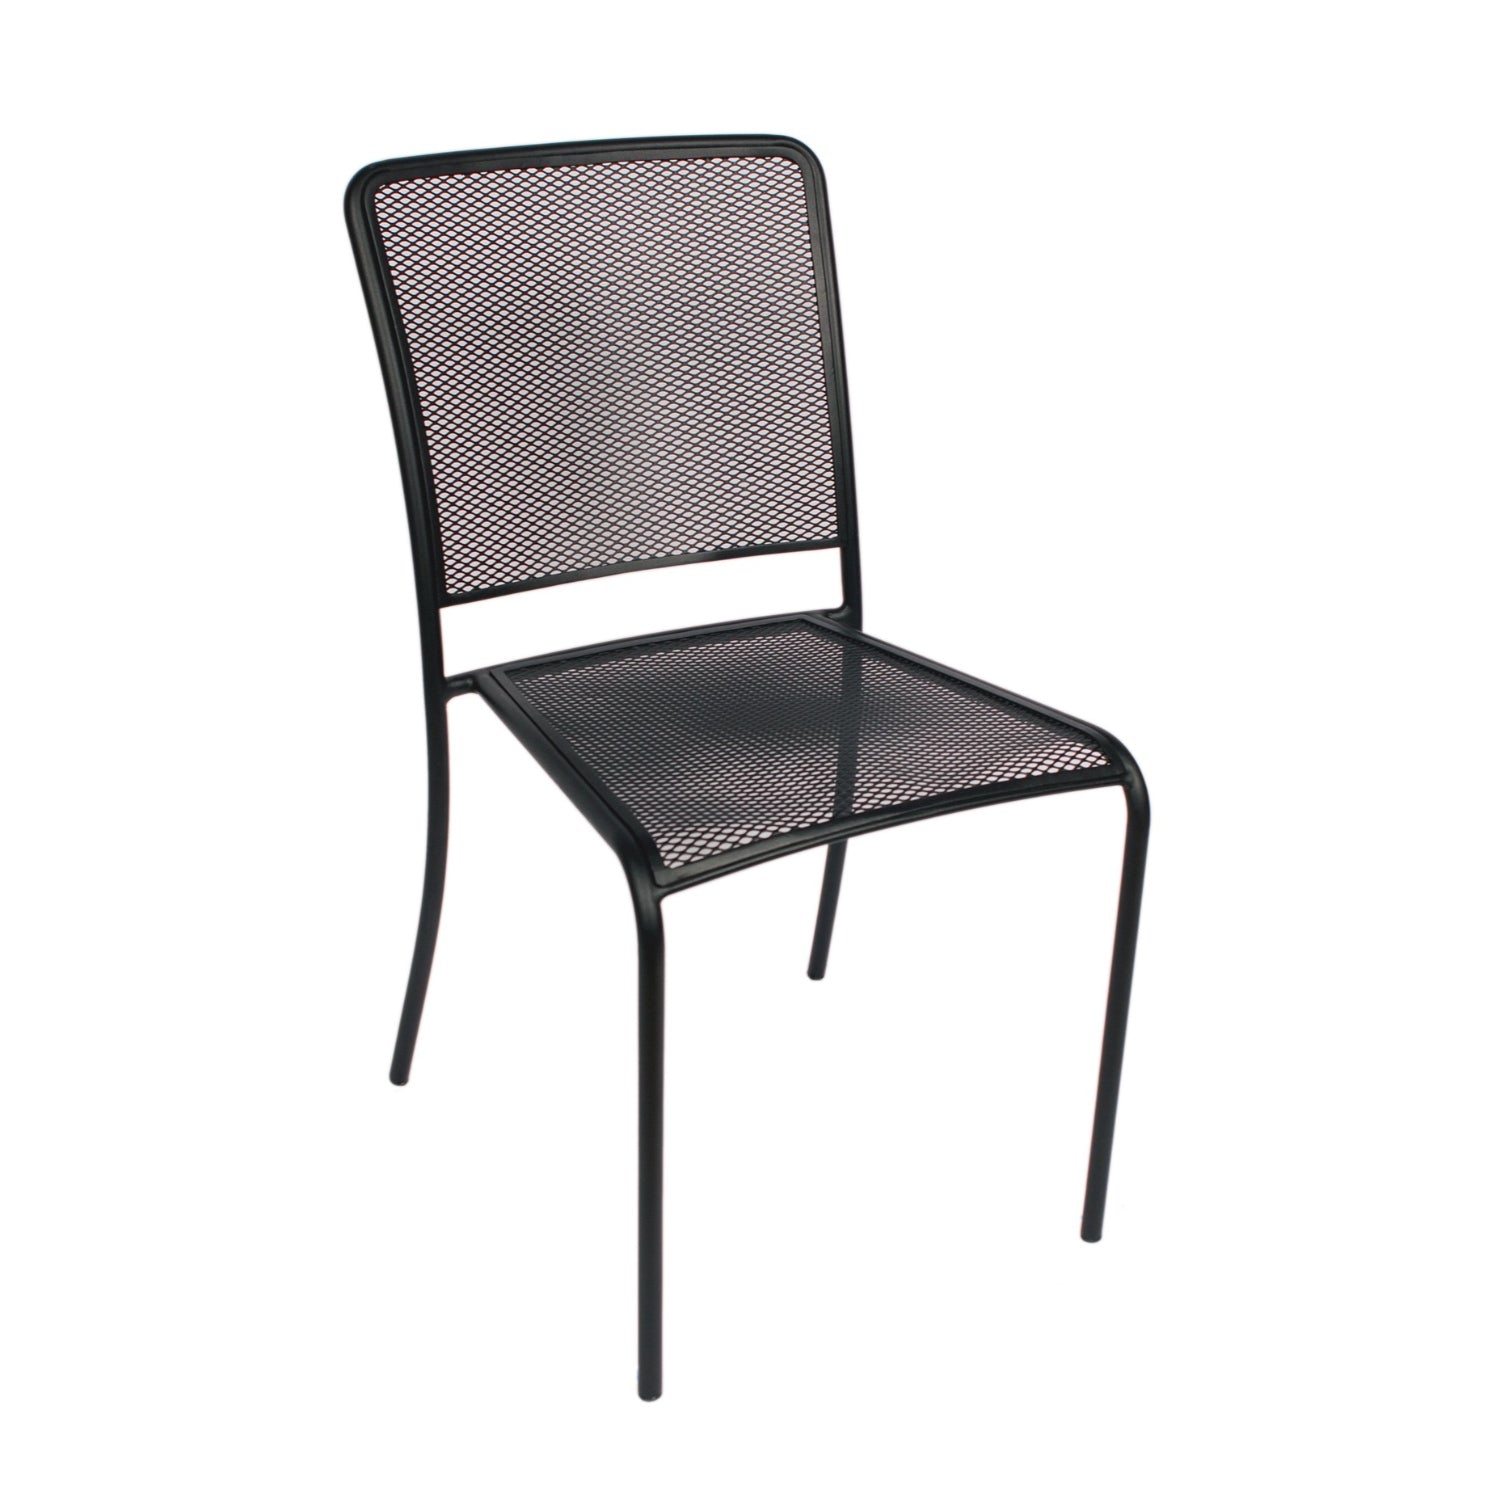 Chesapeake Collection Outdoor/Indoor Black Steel Side Chair with Micro Mesh Seat and Back